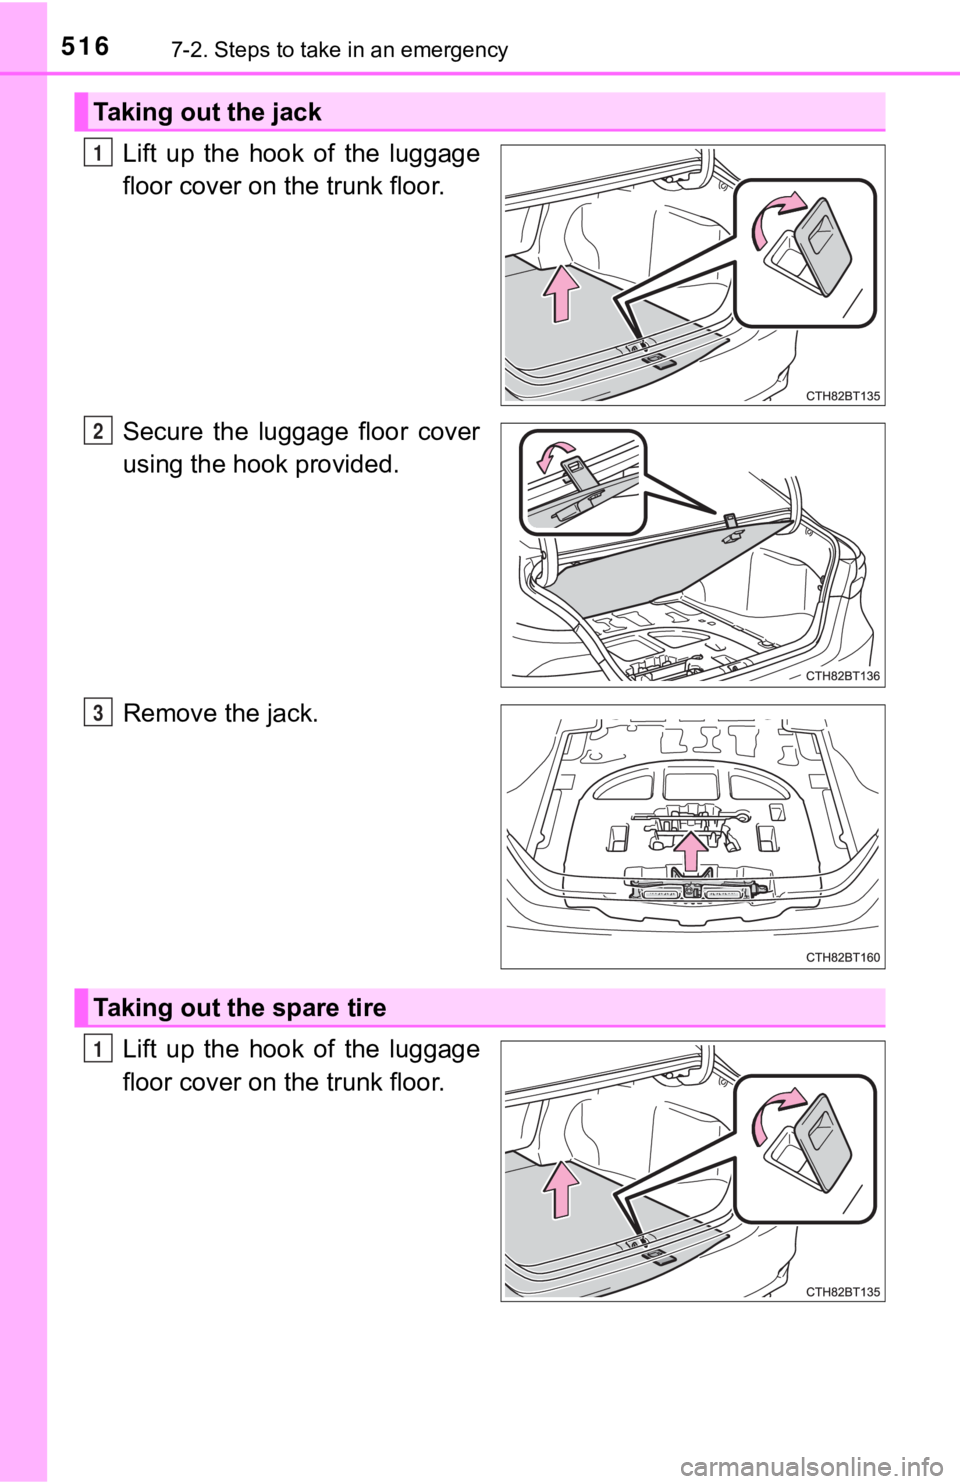 TOYOTA CAMRY HYBRID 2023 User Guide 5167-2. Steps to take in an emergency
Lift  up  the  hook  of  the  luggage
floor cover on the trunk floor.
Secure  the  luggage  floor  cover
using the hook provided.
Remove the jack.
Lift  up  the  